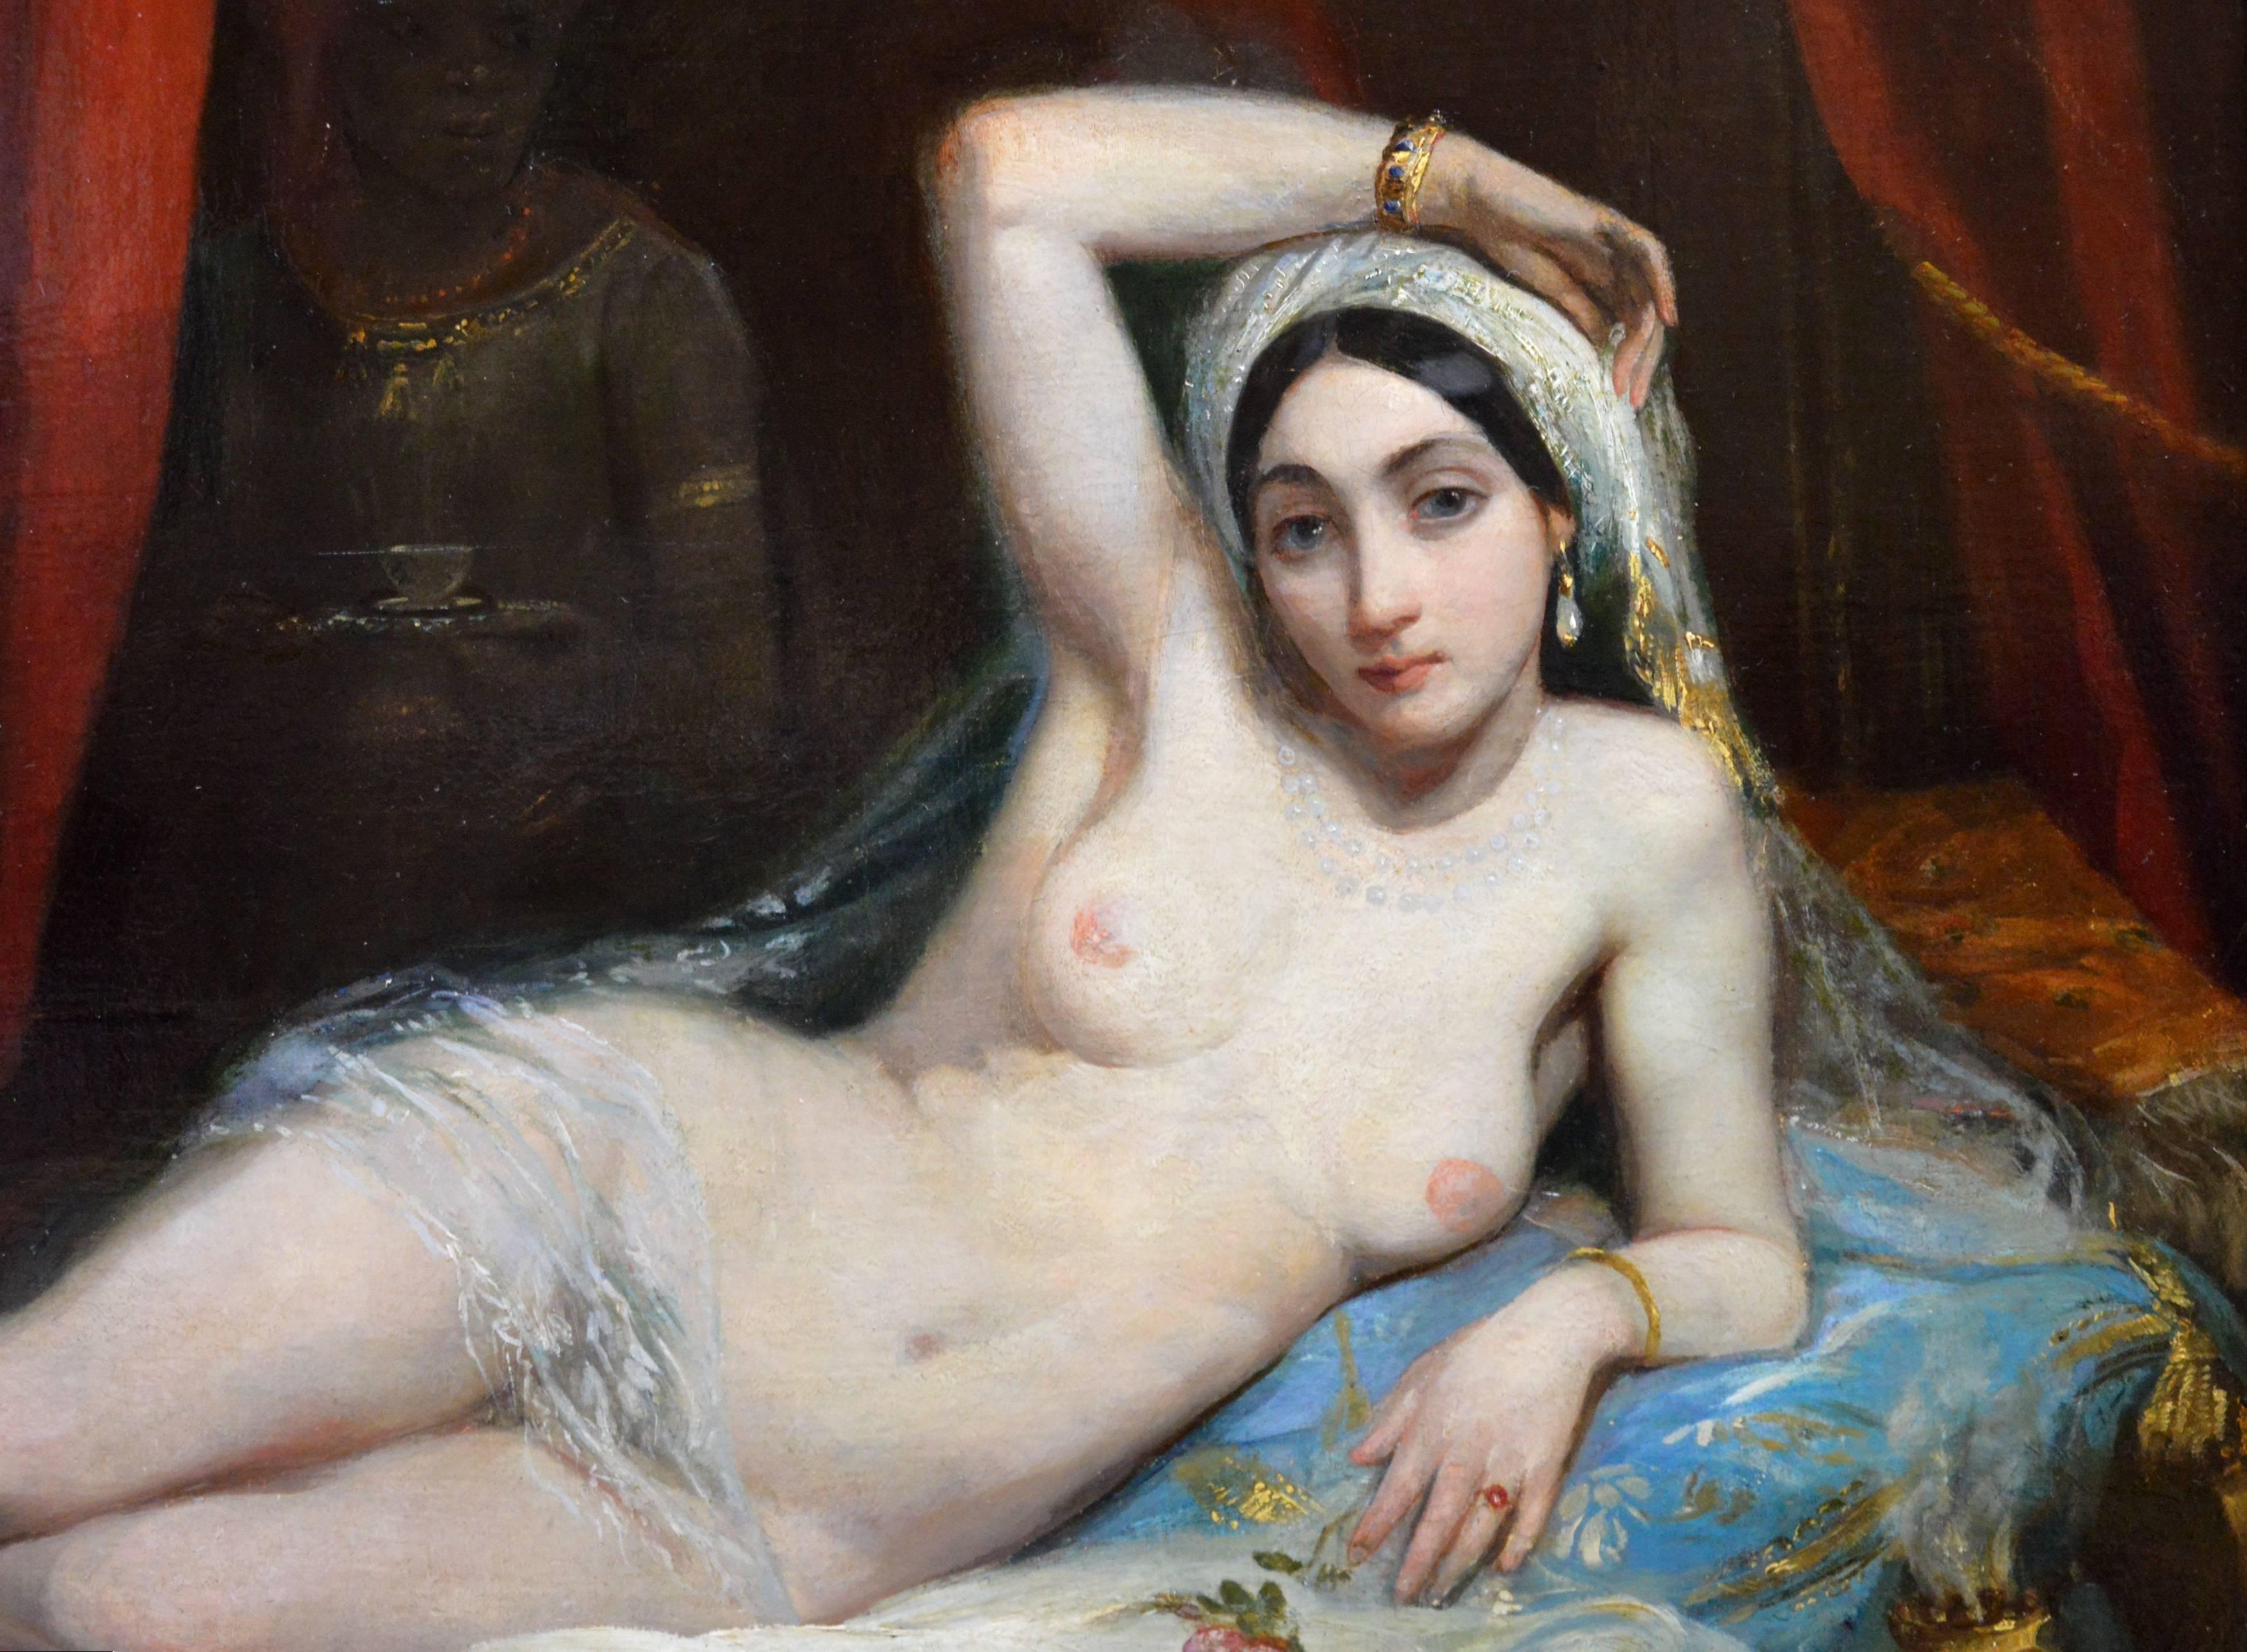 Une Odalisque - 19th Century French Orientalist Nude Oil Painting - Harem Girl 2